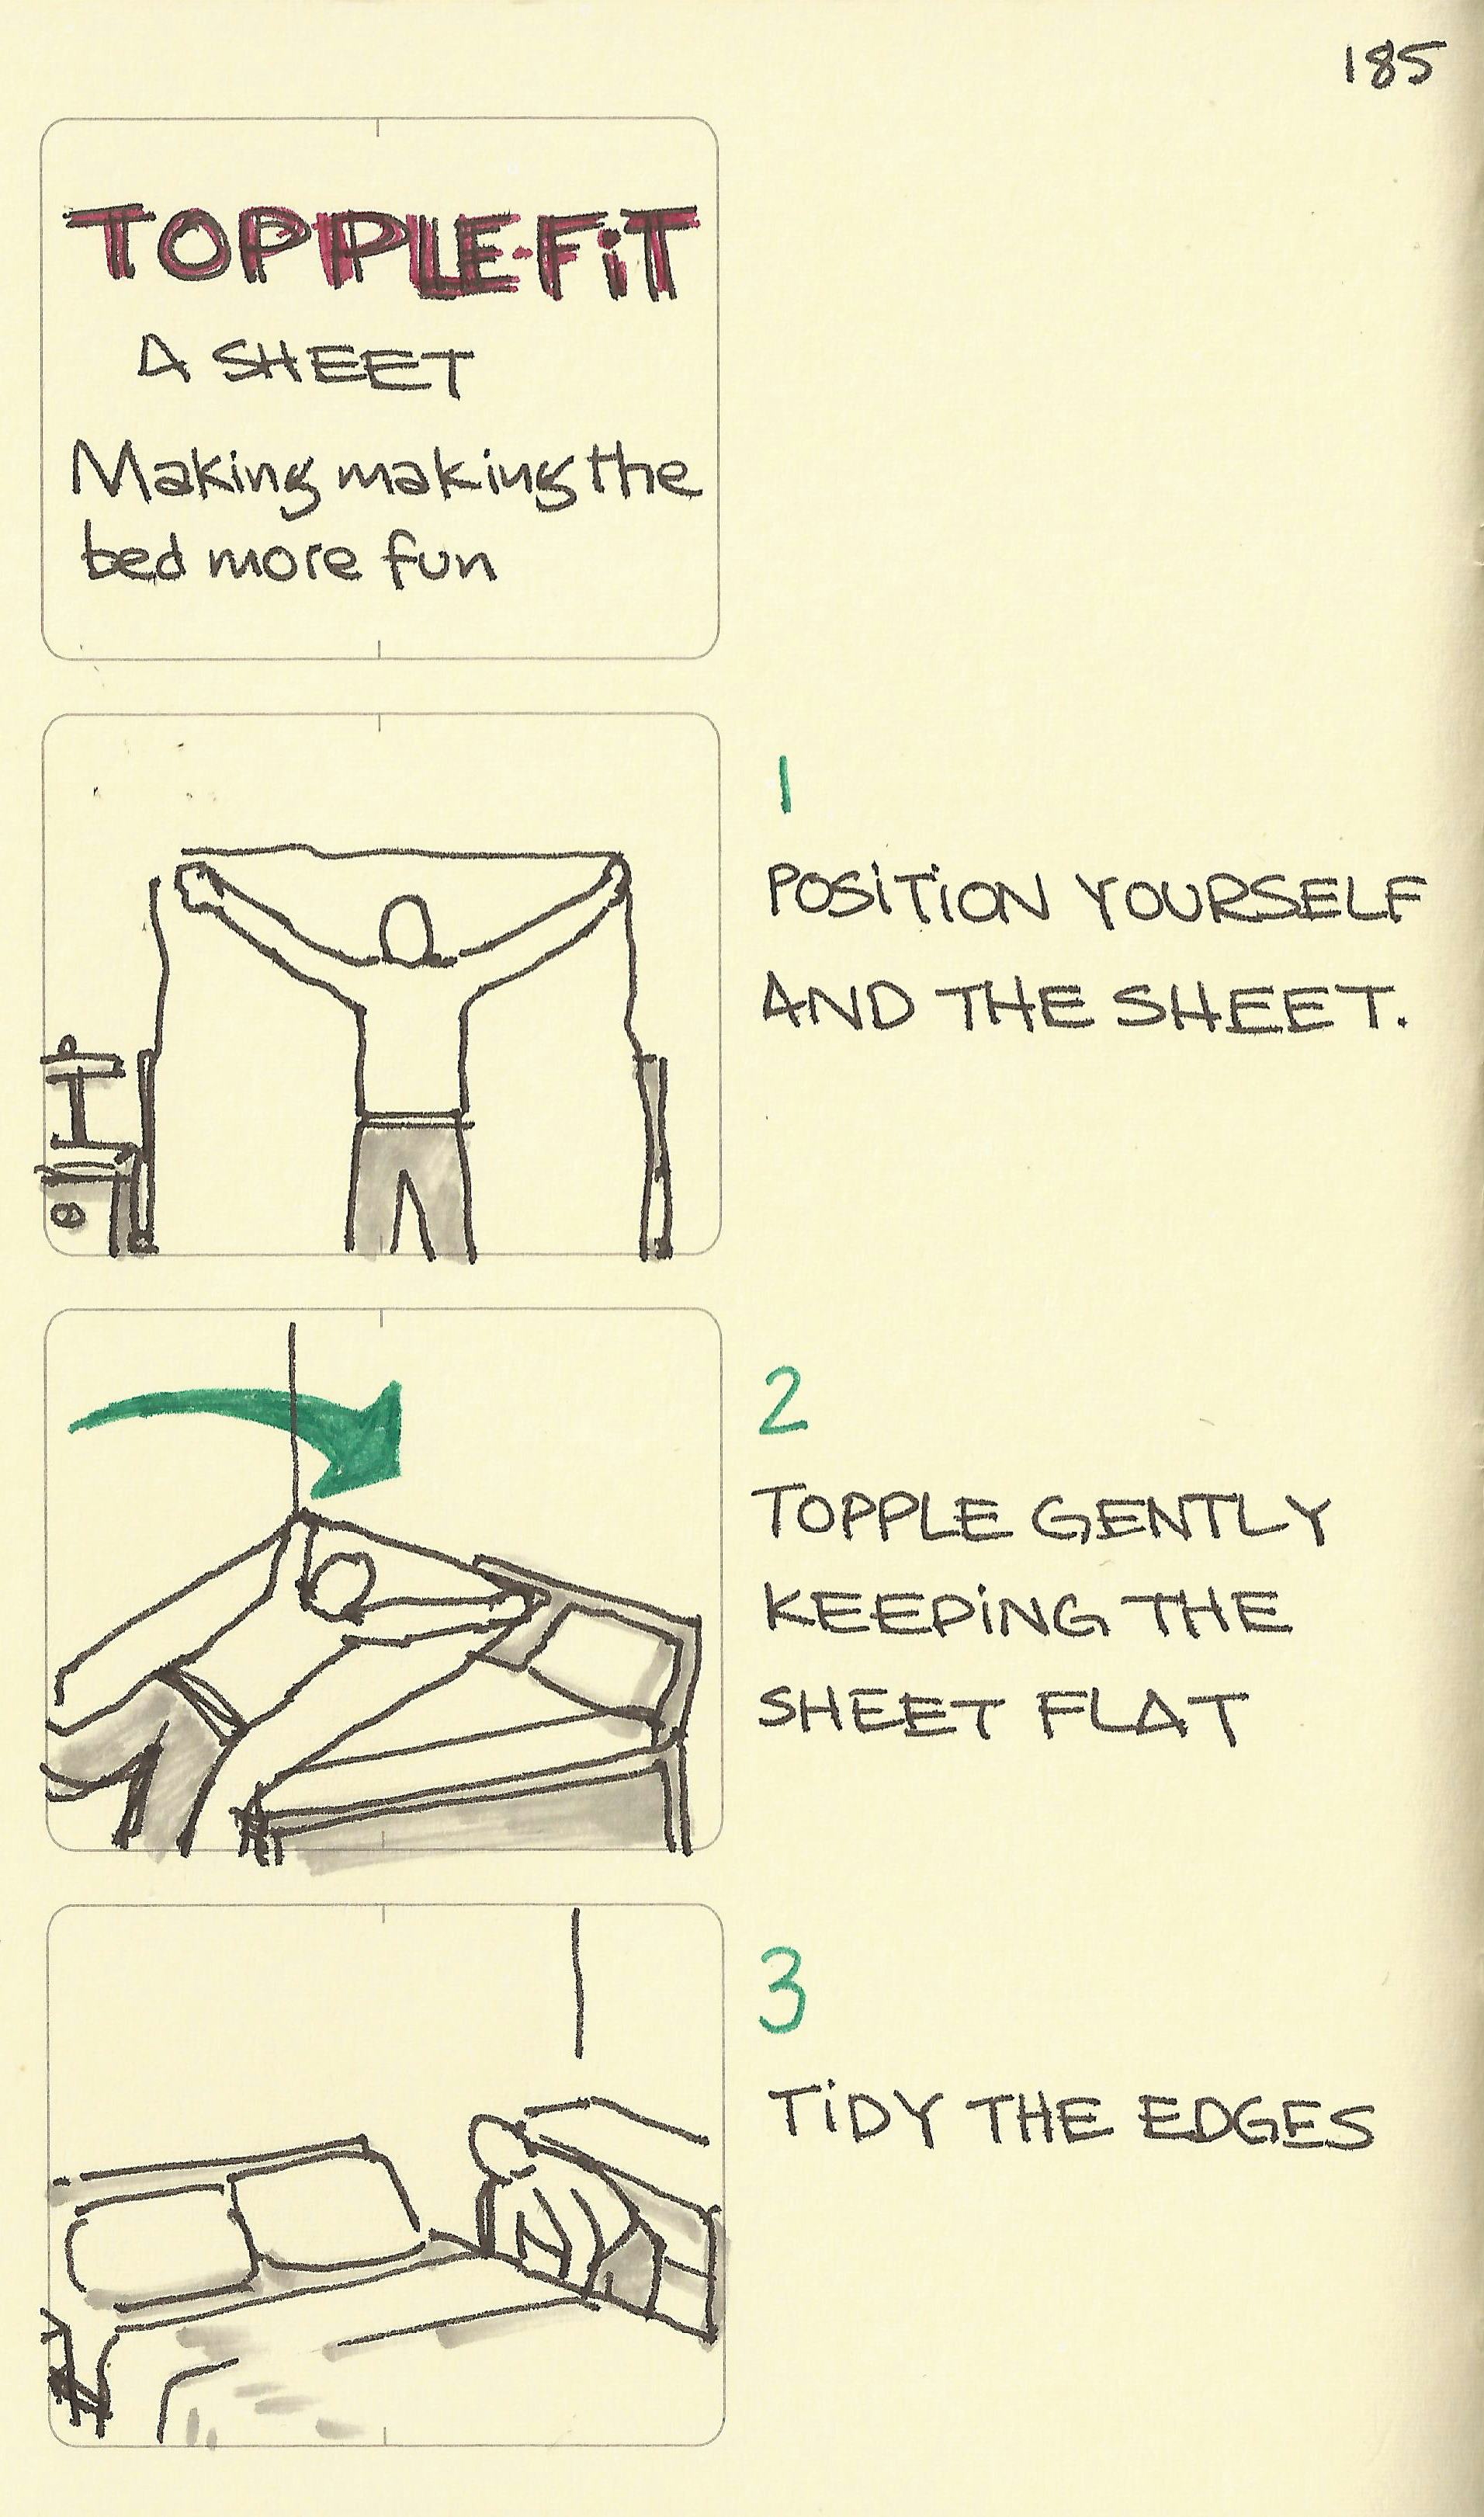 Topple-fit a sheet - Sketchplanations